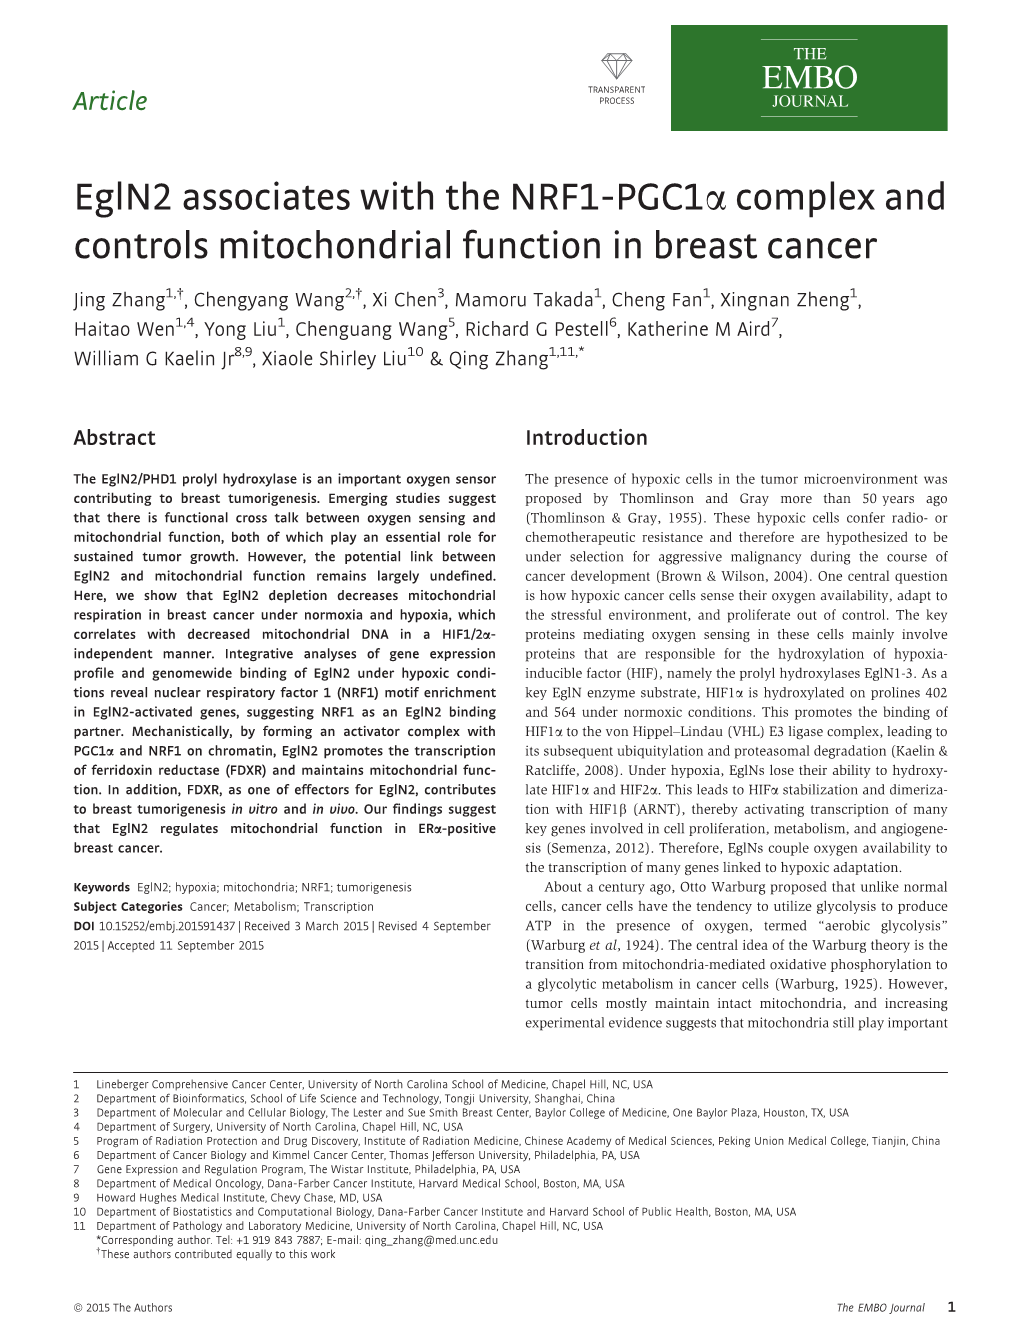 Egln2 Associates with the NRF1PGC1 Complex and Controls